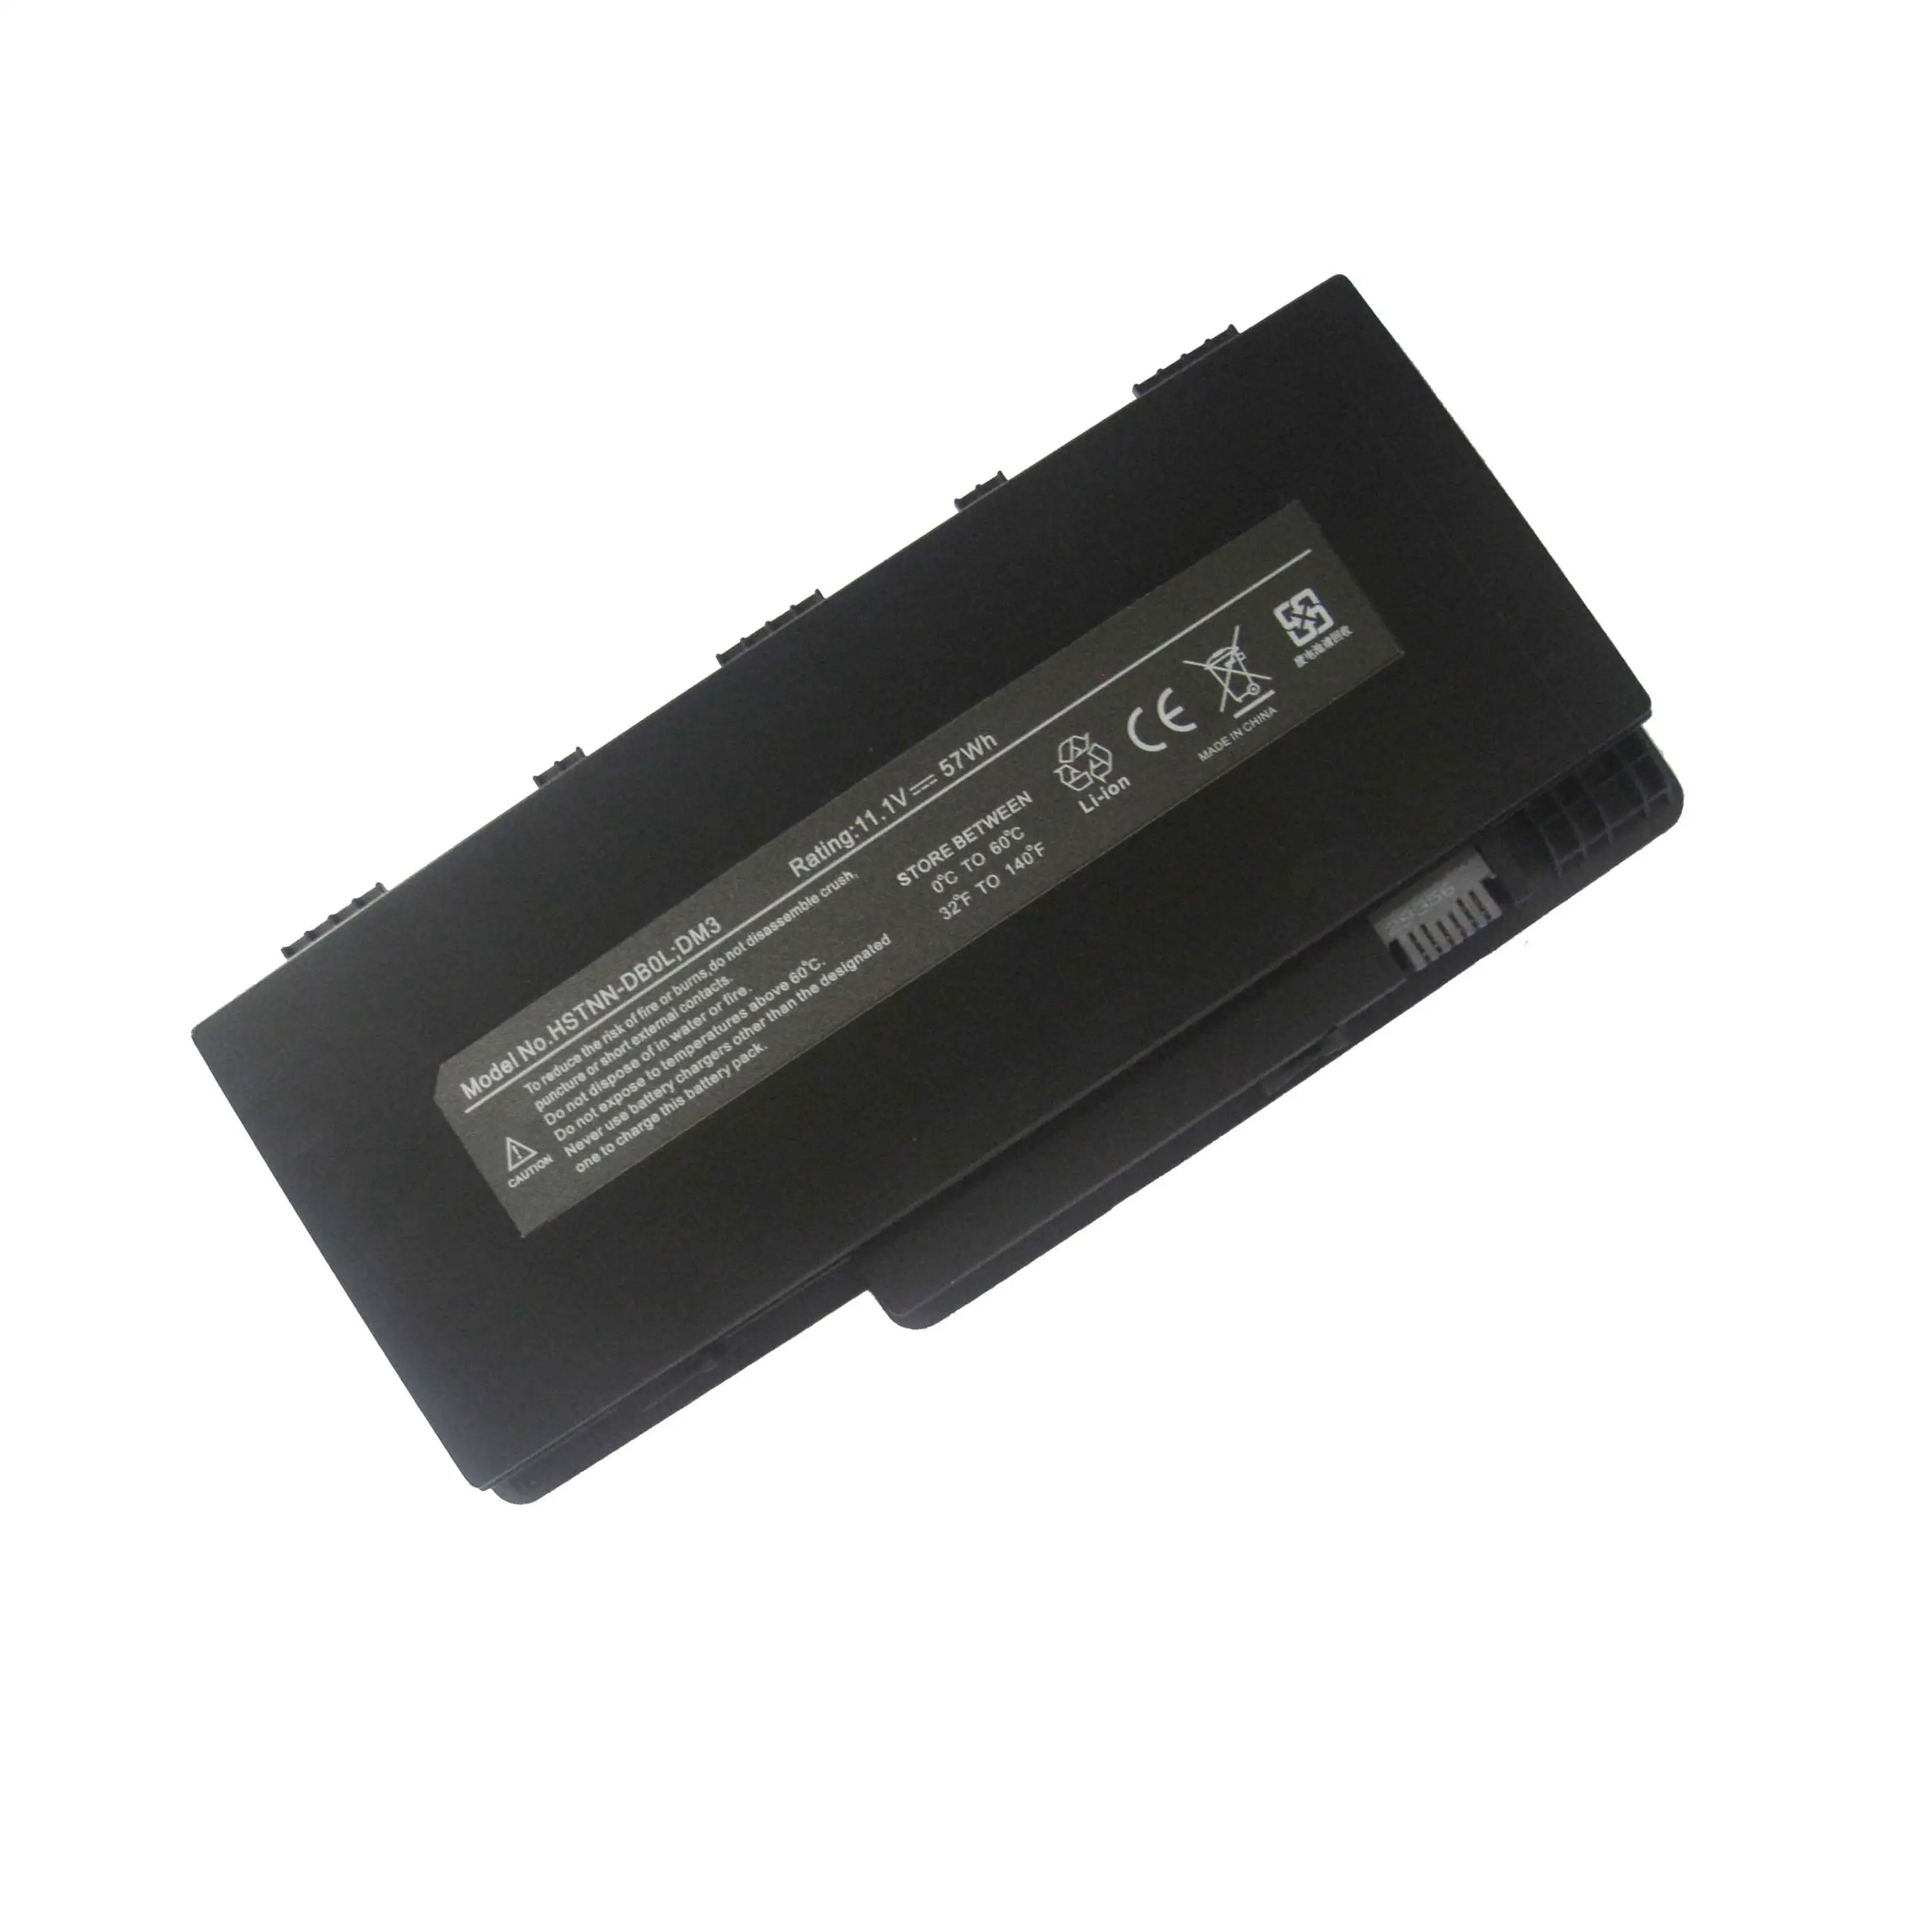 Replacement Notebook Battery for HP Pavilion dm3-1000 dm3a dm3t-1000 dm3z-1000 HSTNN-E02C HSTNN-E03C HSTNN-UB0L